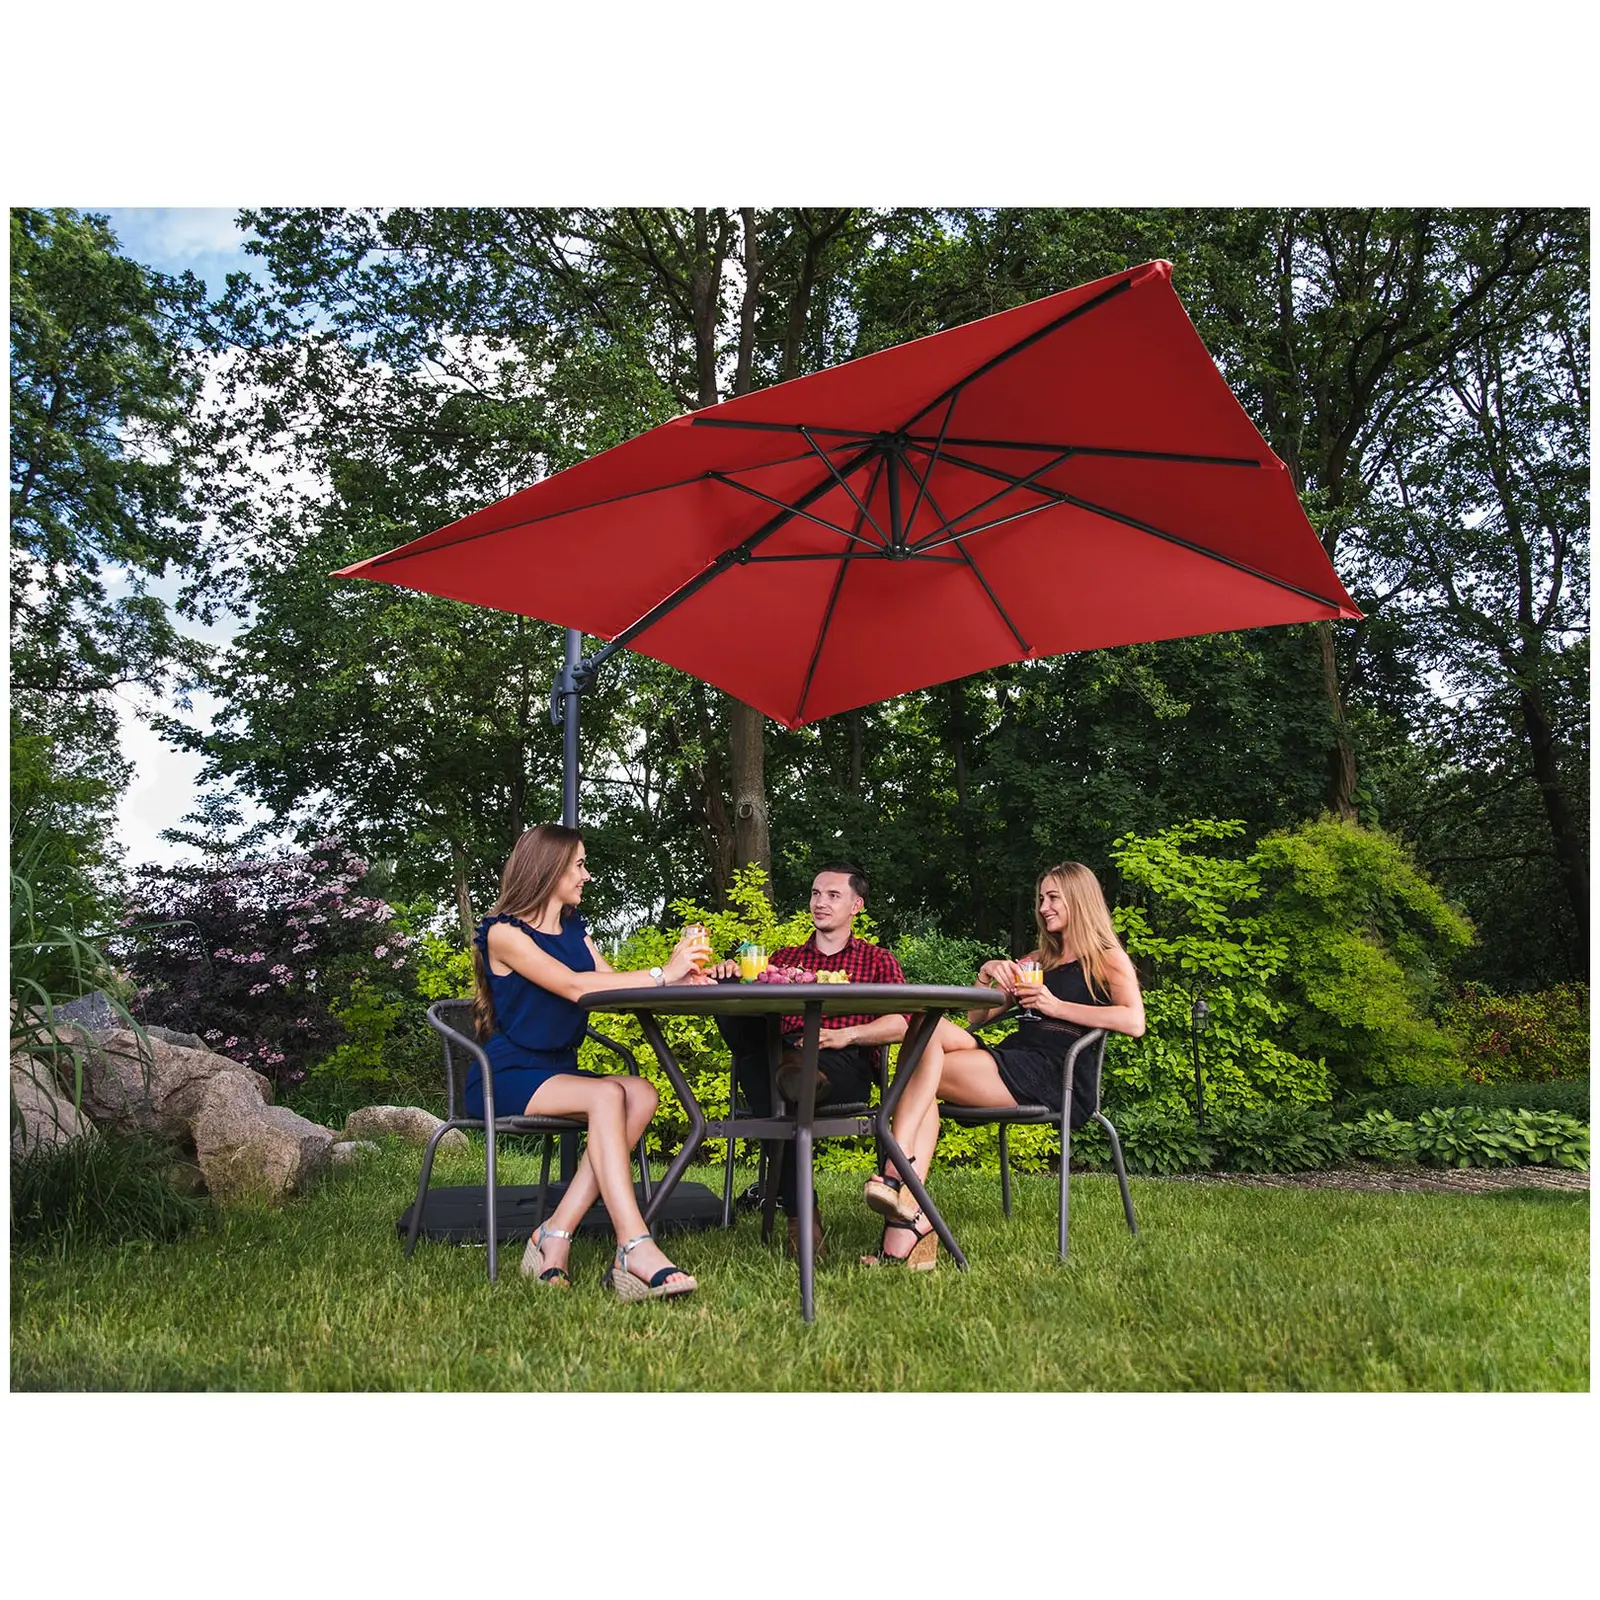 Factory second Hanging Parasol - red - square - 250 x 250 cm - rotatable